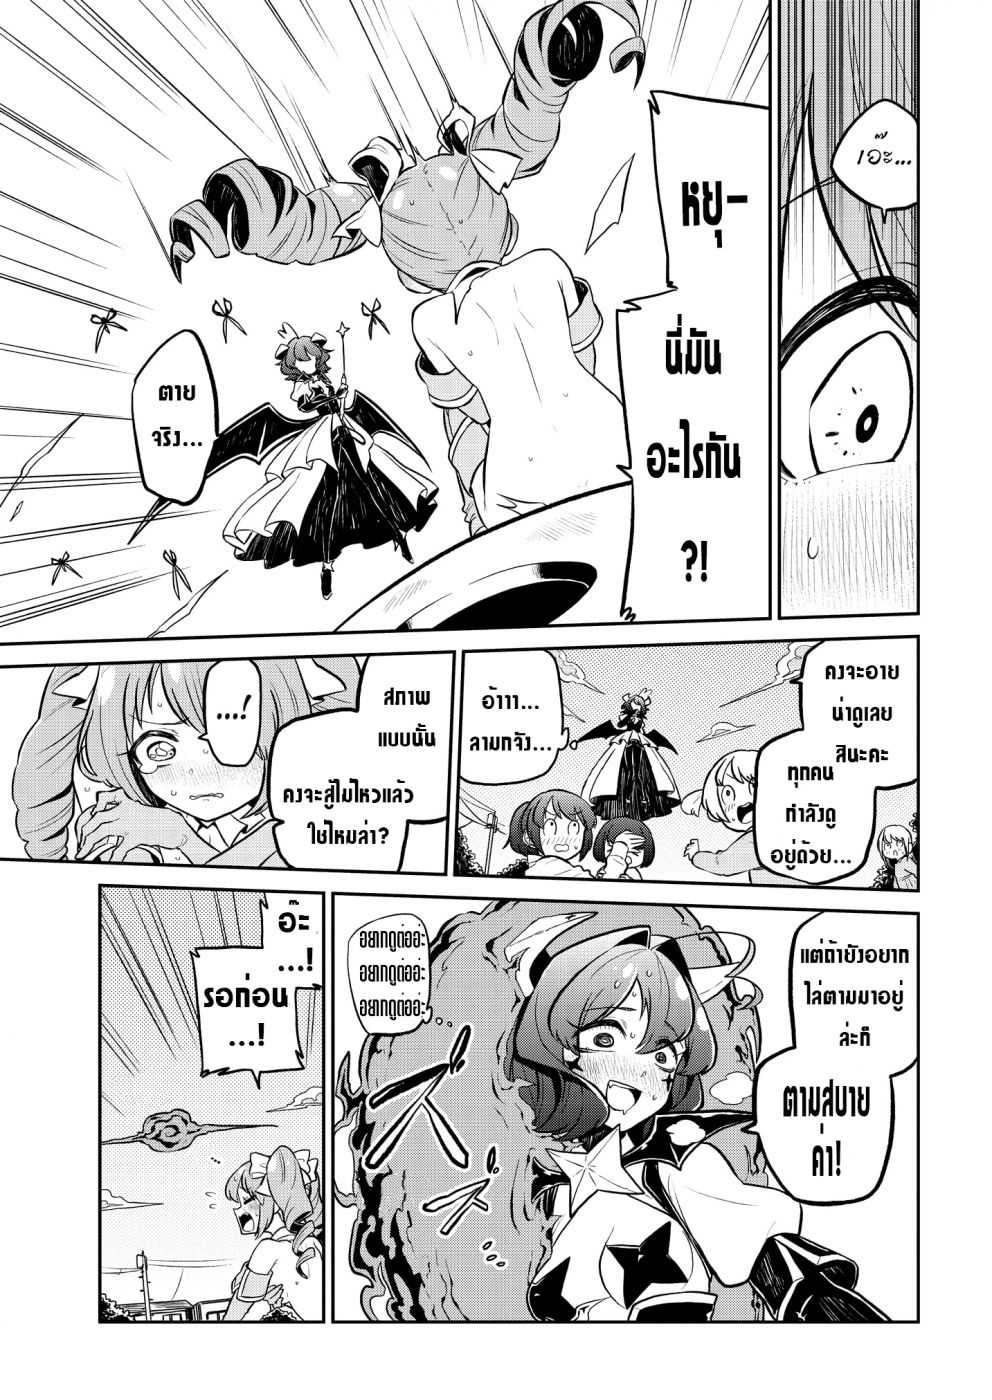 Looking up to Magical Girls 6 (9)